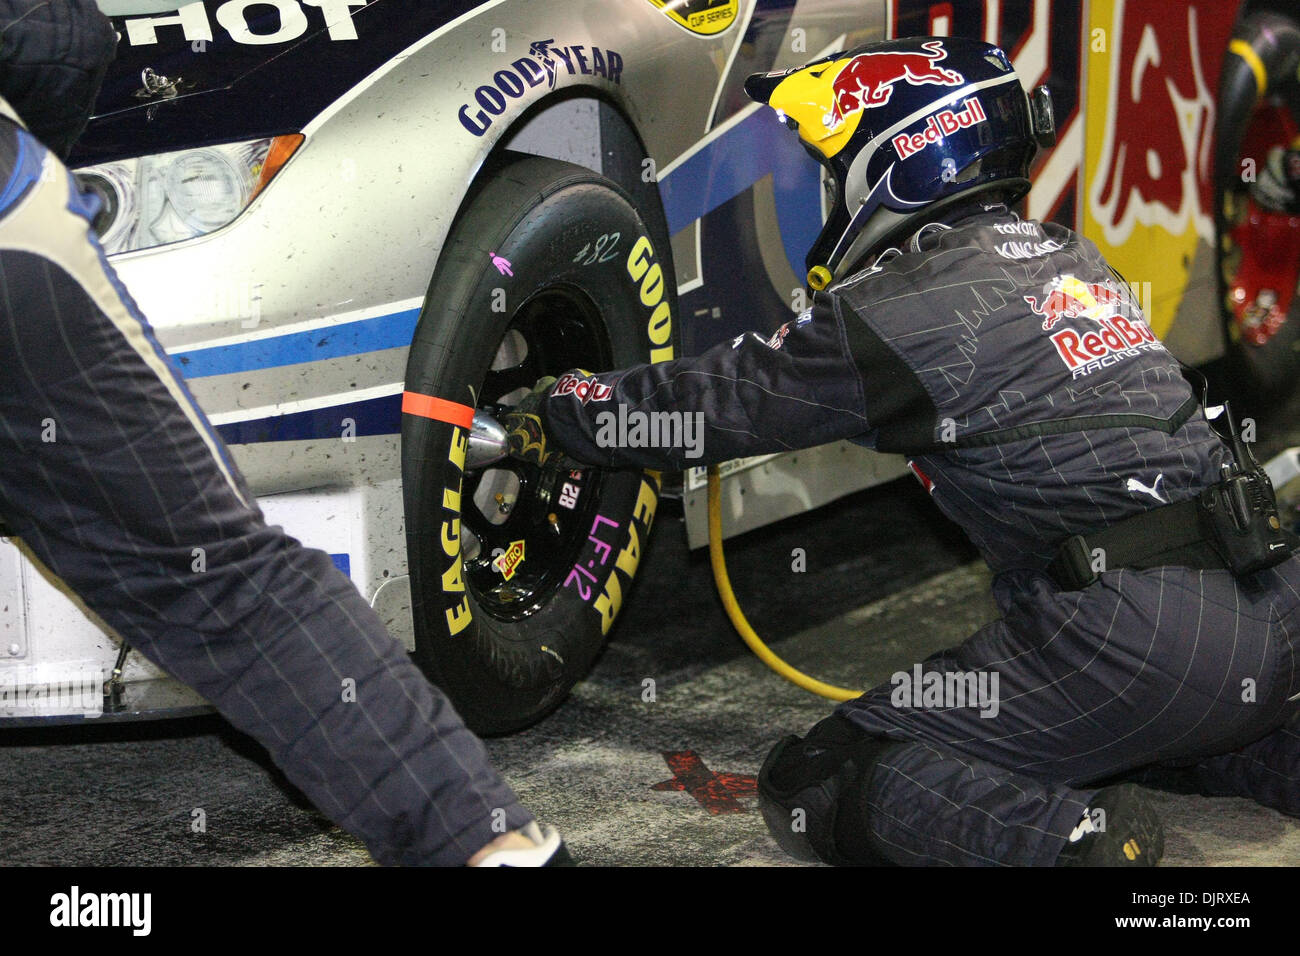 May 30, 2010 - Charlotte, North Carolina, USA - 30 May 2010: The front tire changer zips on the lugnuts onto the #83 Red Bull car driven by Scott Speed during the Coca Cola 600 at Lowes Motor Speedway in Charlotte, North Carolina. (Credit Image: © Jim Dedmon/Southcreek Global/ZUMApress.com) Stock Photo